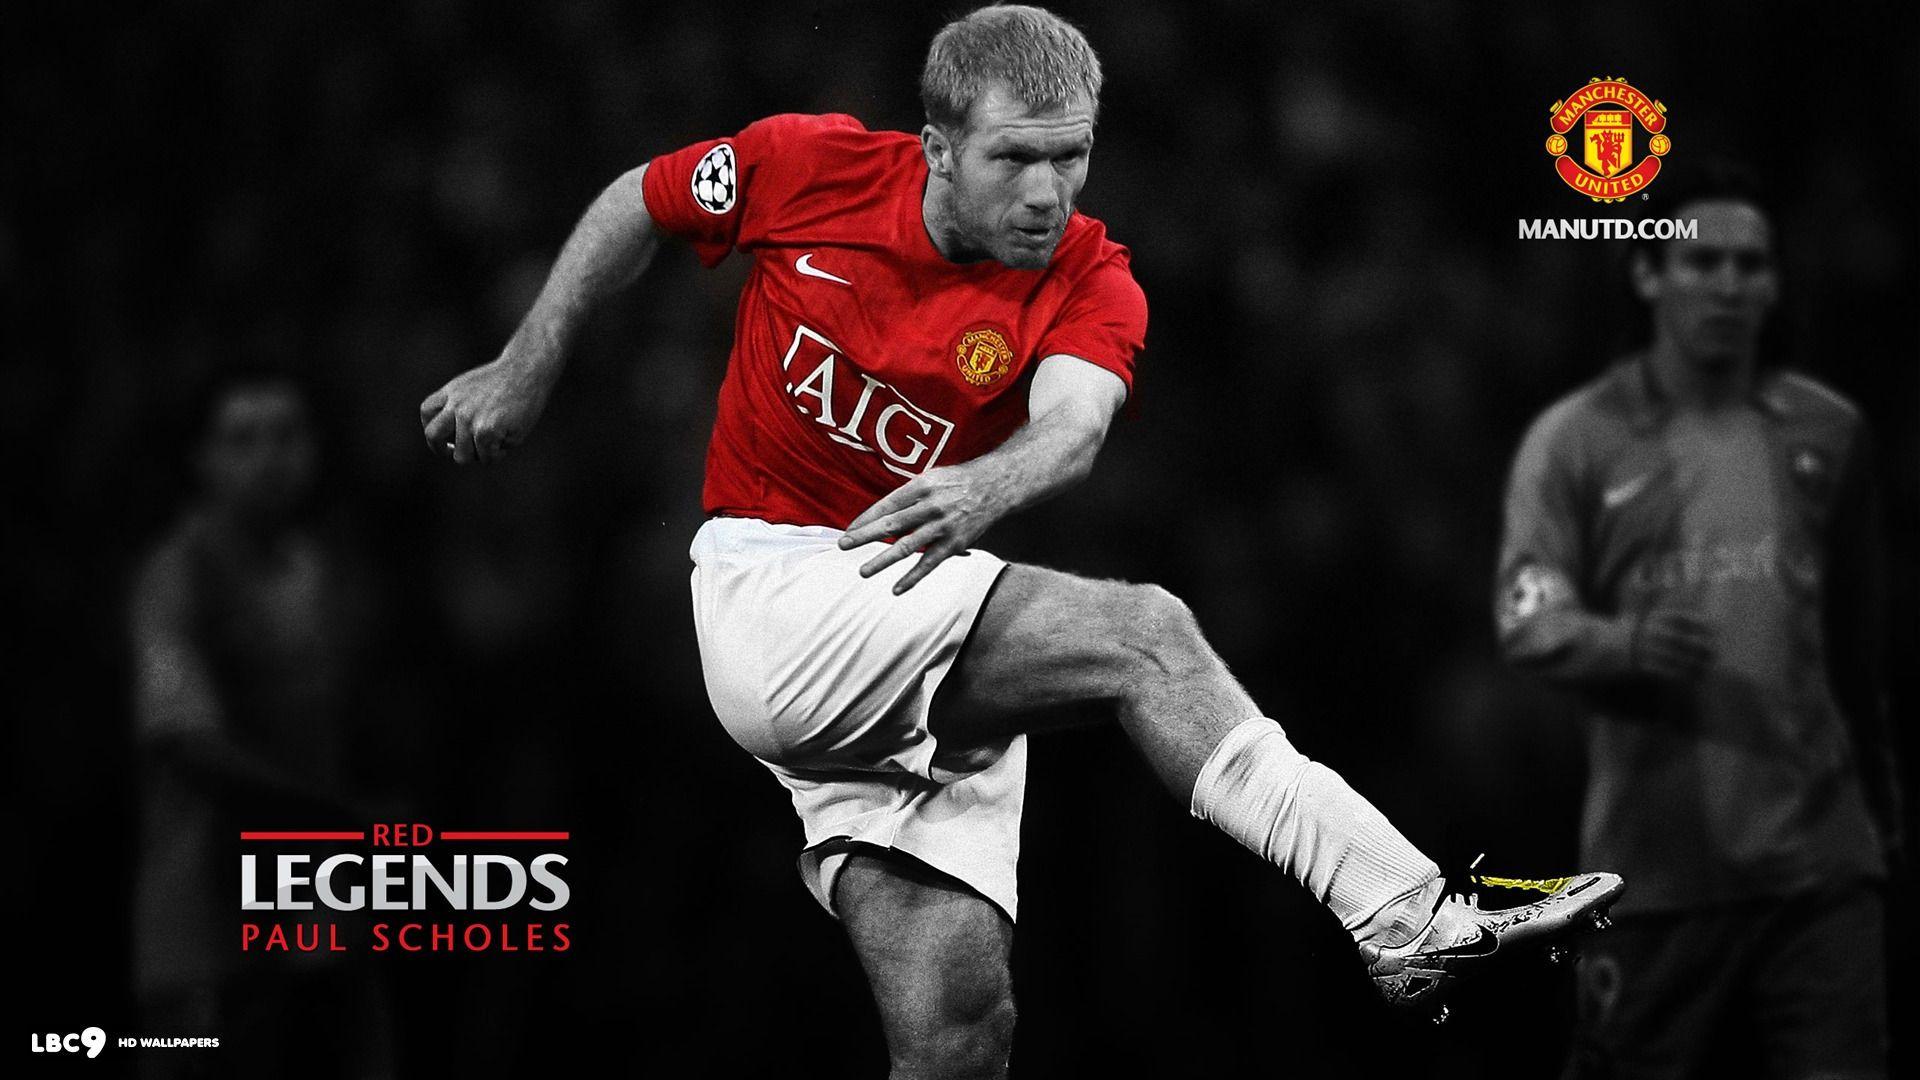 Manchester United Paul Scholes Red Legends Wallpaper: Players